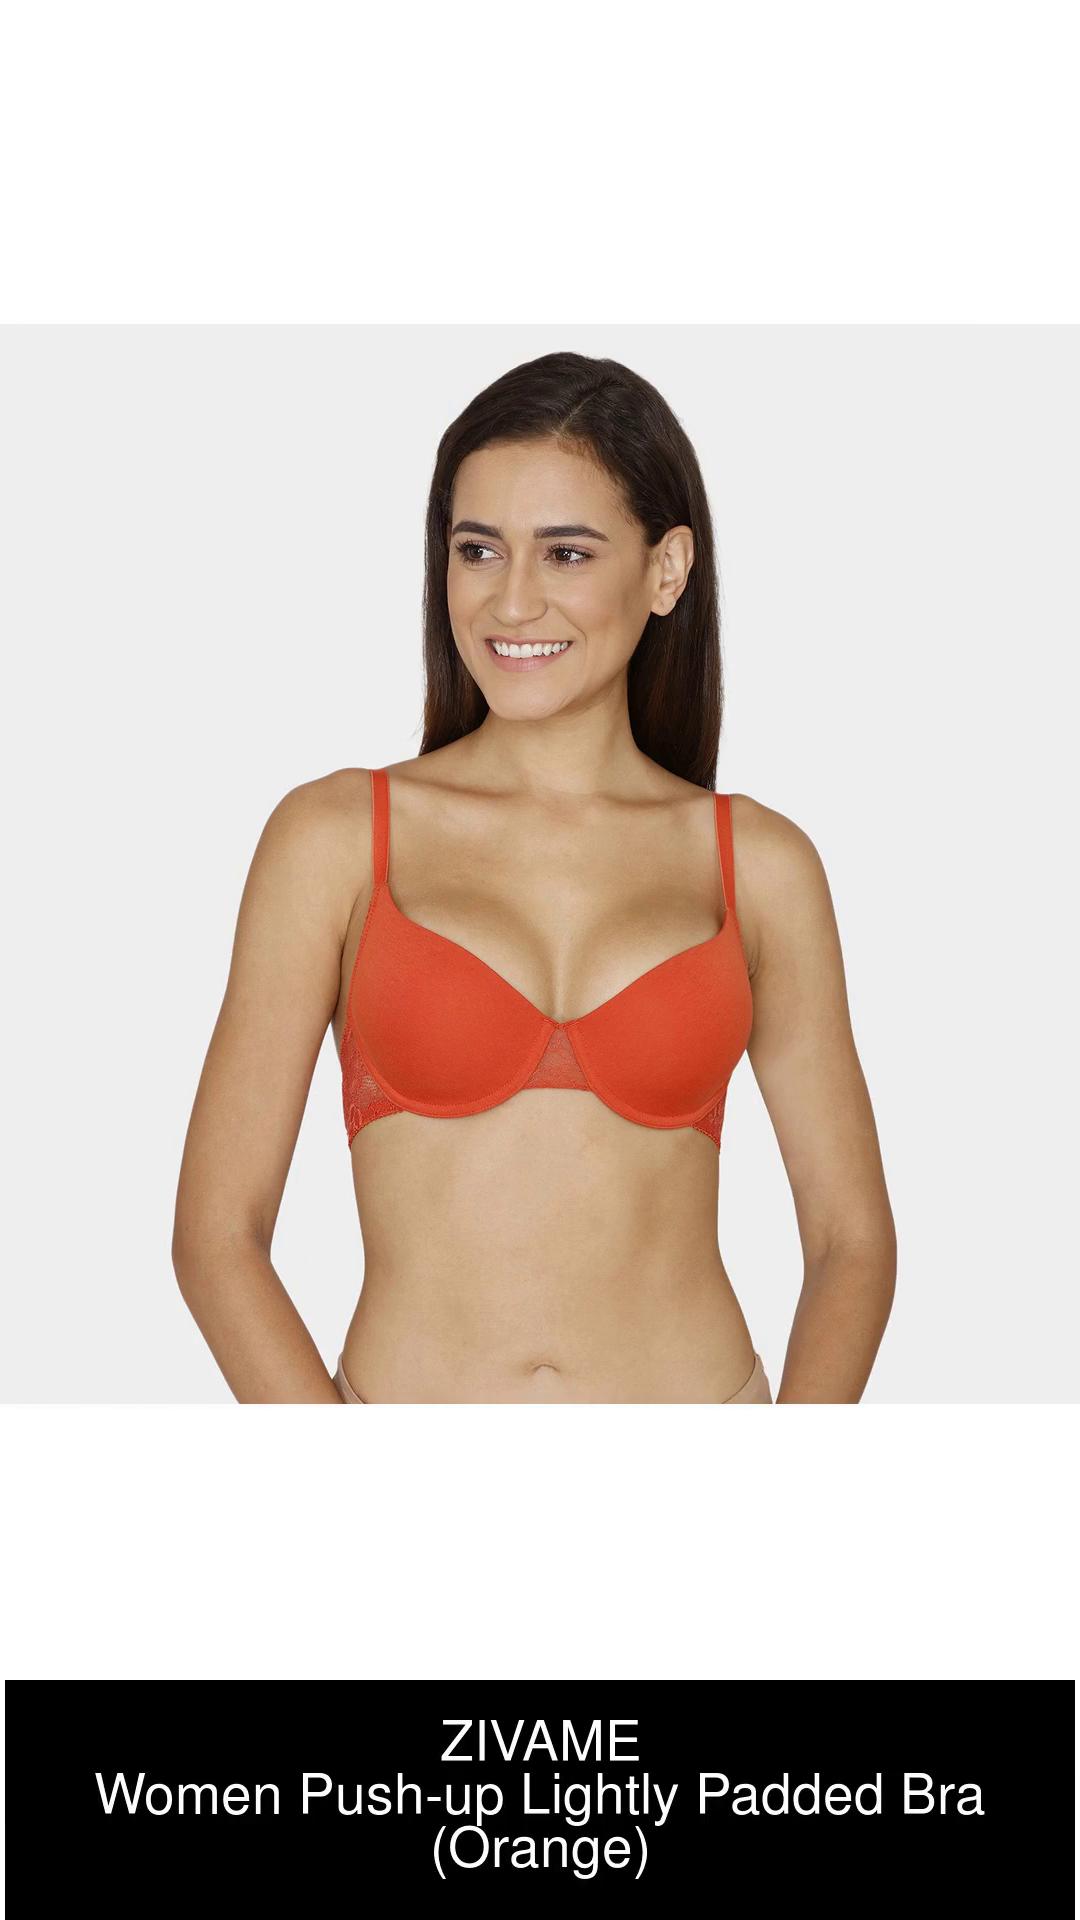 Van Heusen Intimates Bras, Women Anti Bacterial Padded Breathable Bra - No  Slip Strap And Flexi Wires for Women at Vanheuseninti